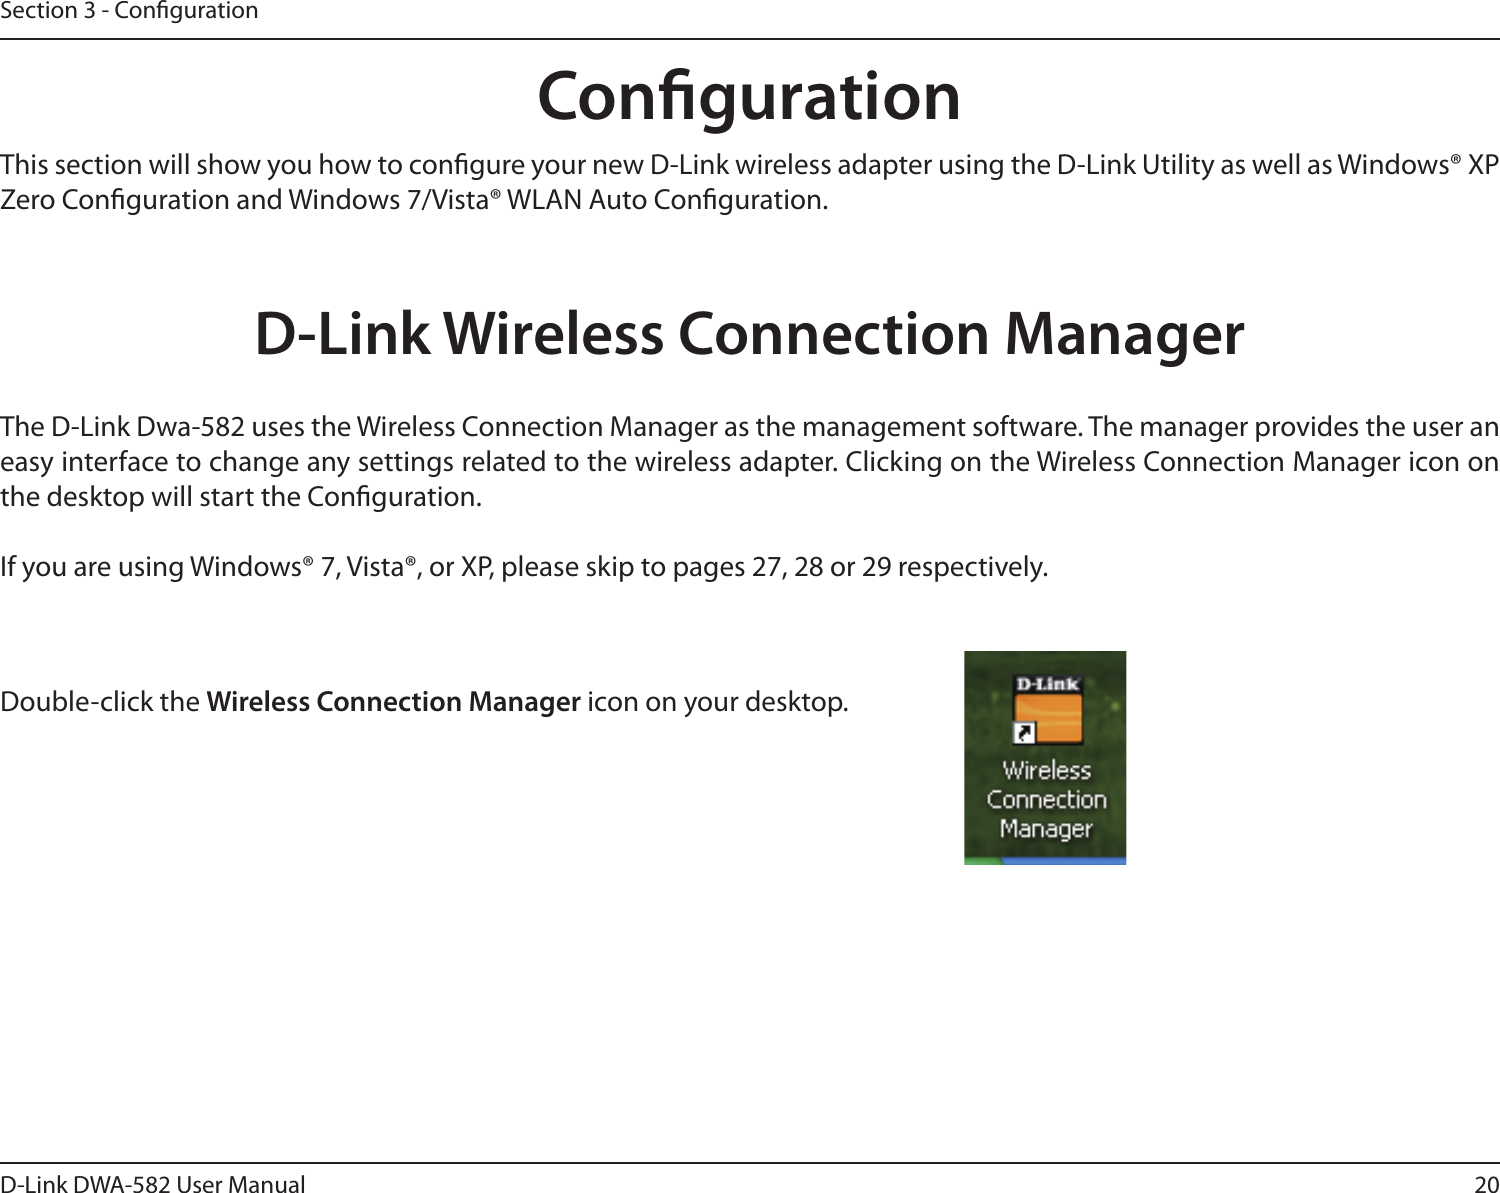 20D-Link DWA-582 User ManualSection 3 - CongurationCongurationD-Link Wireless Connection ManagerThis section will show you how to congure your new D-Link wireless adapter using the D-Link Utility as well as Windows® XP Zero Conguration and Windows 7/Vista® WLAN Auto Conguration.The D-Link Dwa-582 uses the Wireless Connection Manager as the management software. The manager provides the user an easy interface to change any settings related to the wireless adapter. Clicking on the Wireless Connection Manager icon on the desktop will start the Conguration.If you are using Windows® 7, Vista®, or XP, please skip to pages 27, 28 or 29 respectively.Double-click the Wireless Connection Manager icon on your desktop.